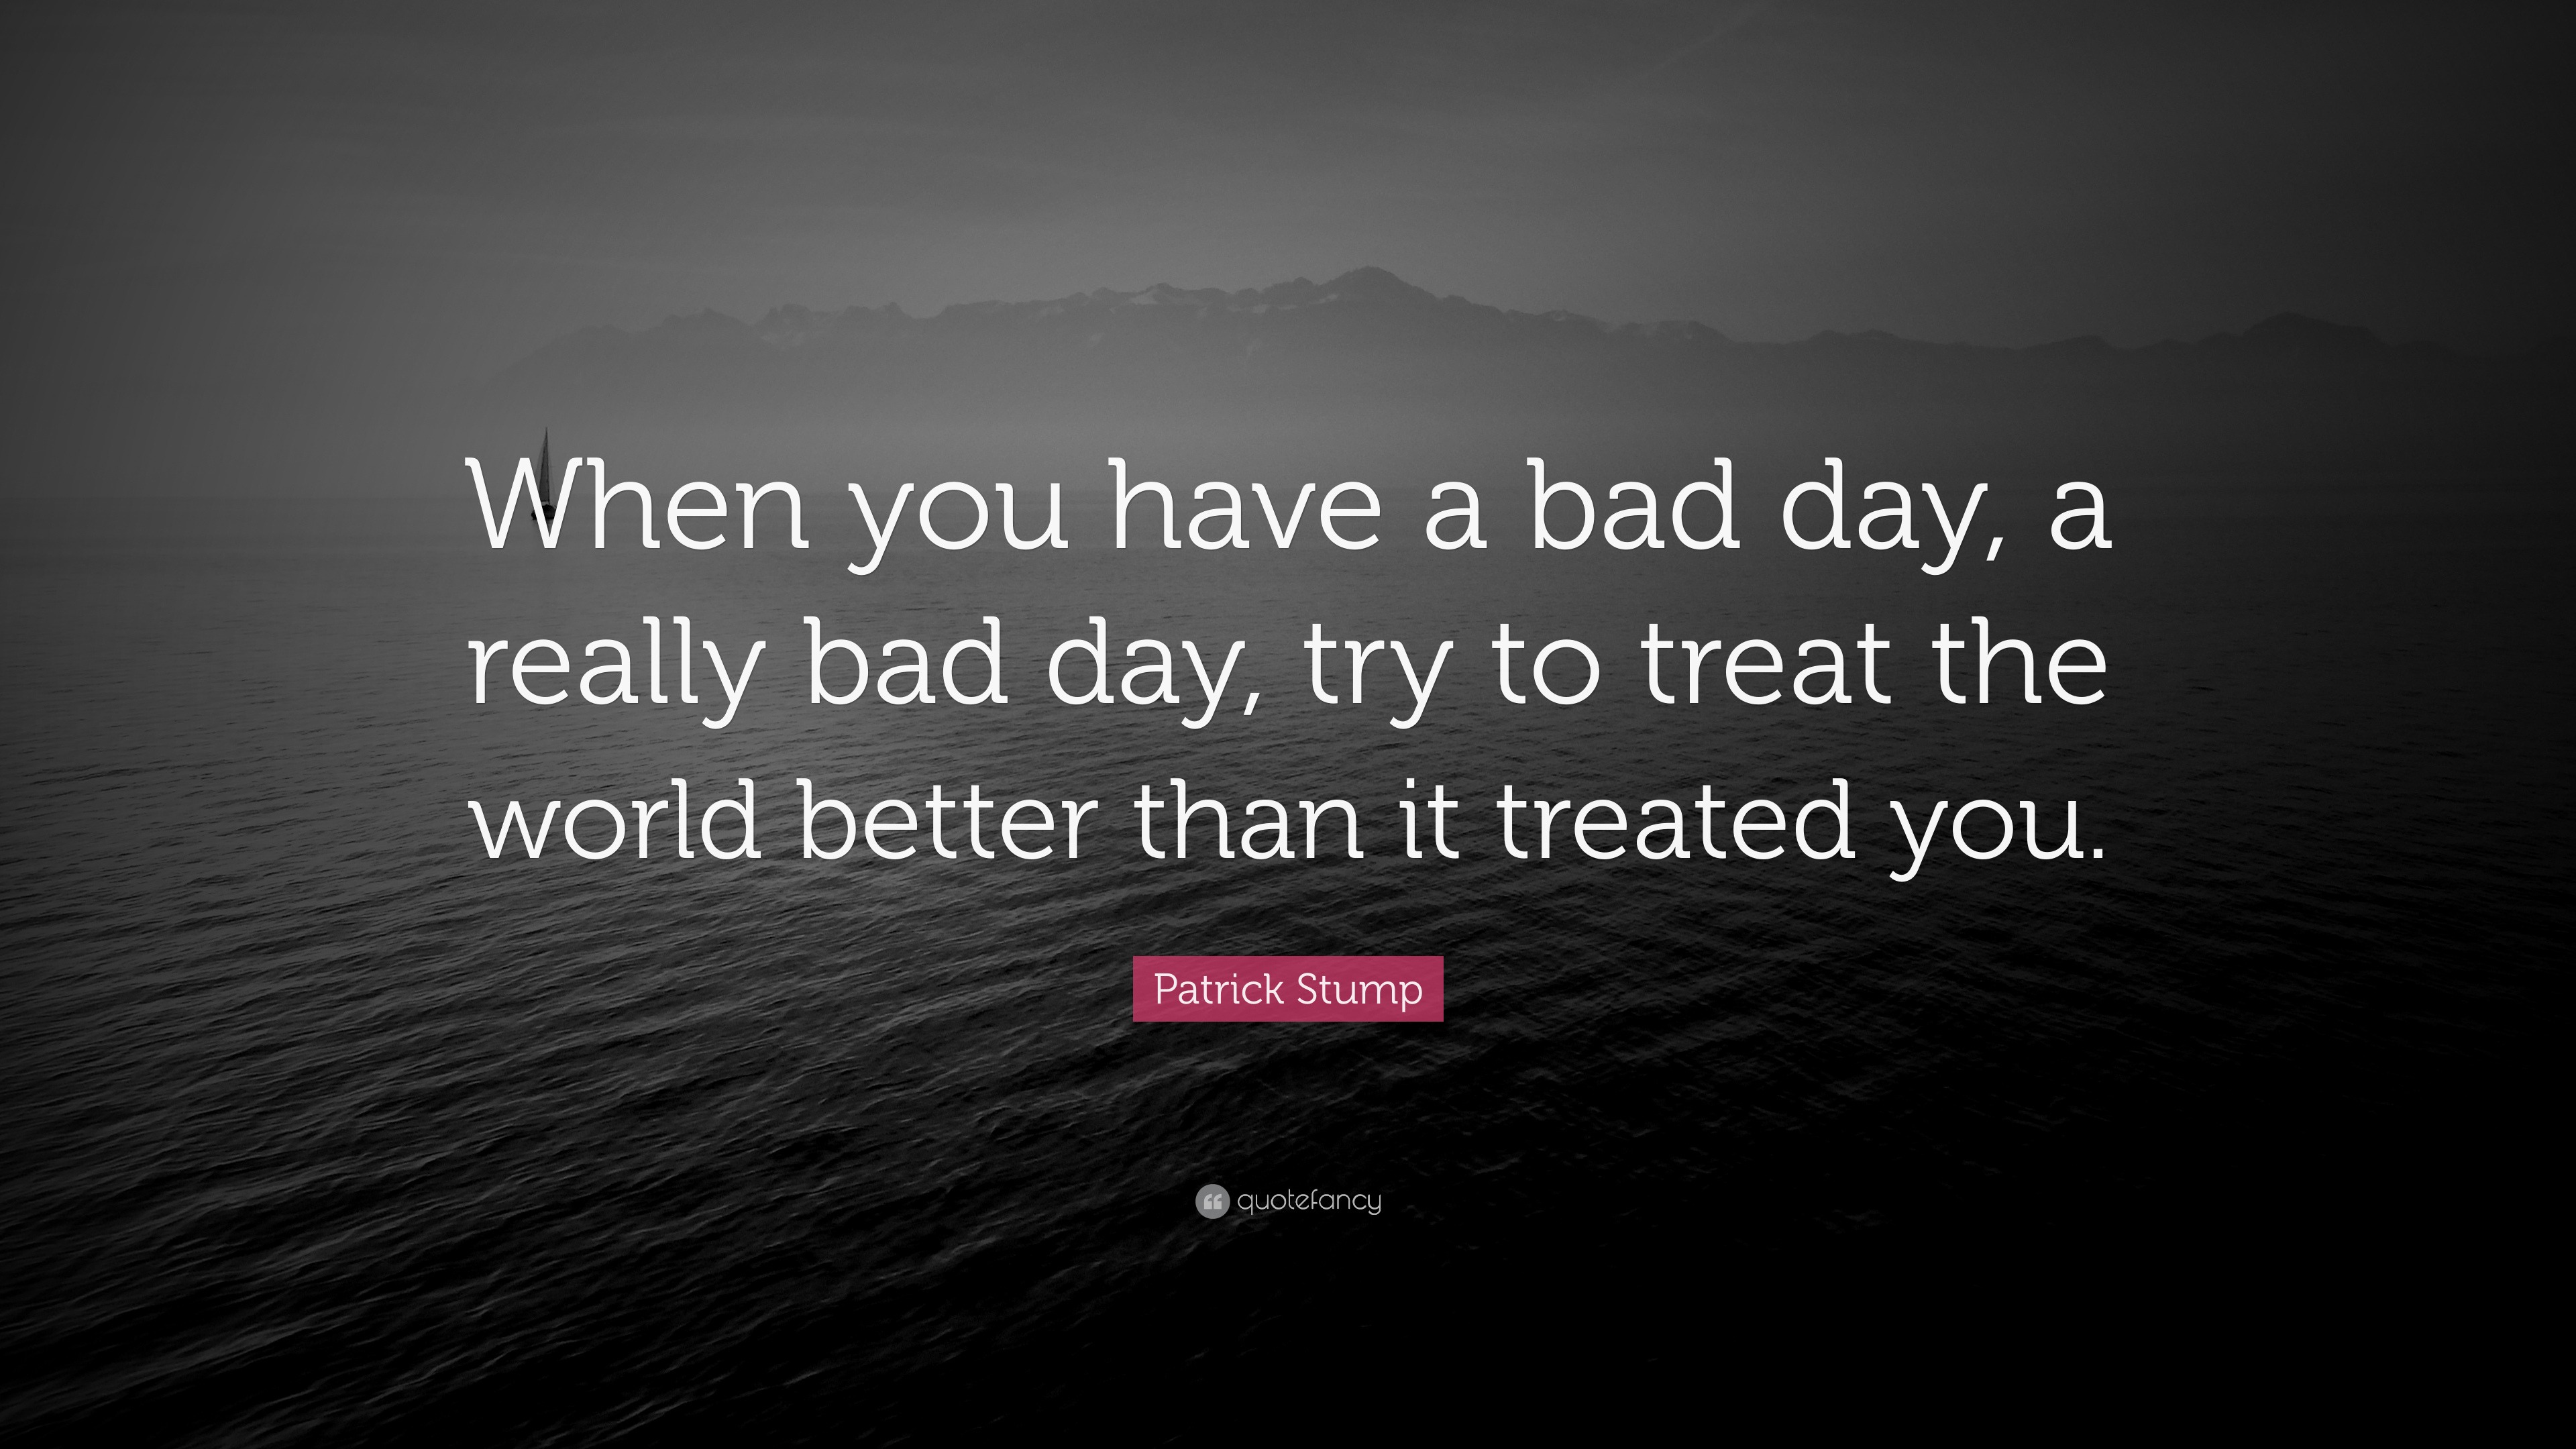 Patrick Stump Quote: “When you have a bad day, a really bad day, try to